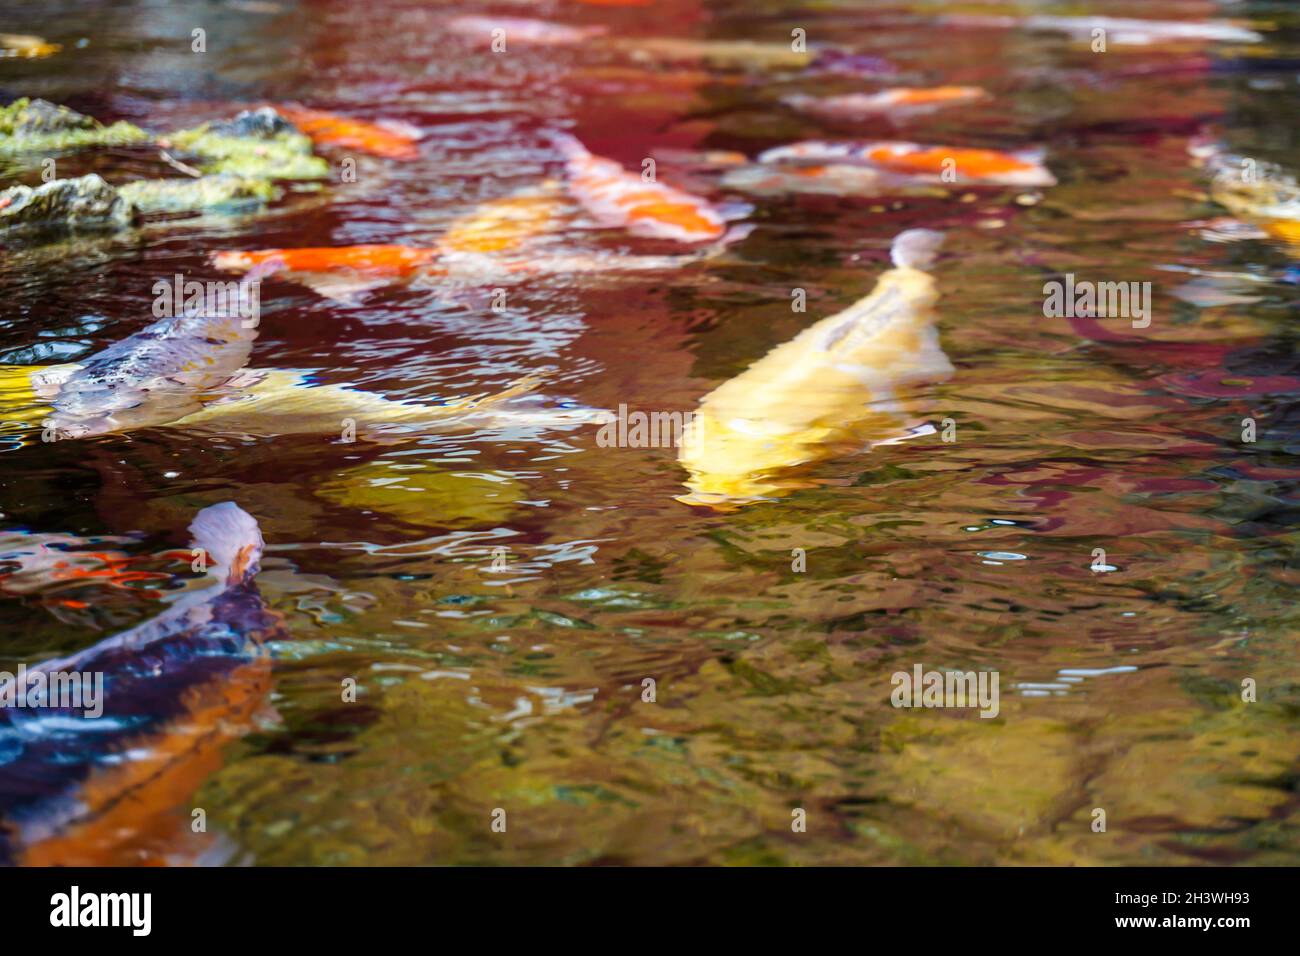 A lake full of large and colorful fish that swims on the surface of the water. Picture taken close to the fish Stock Photo